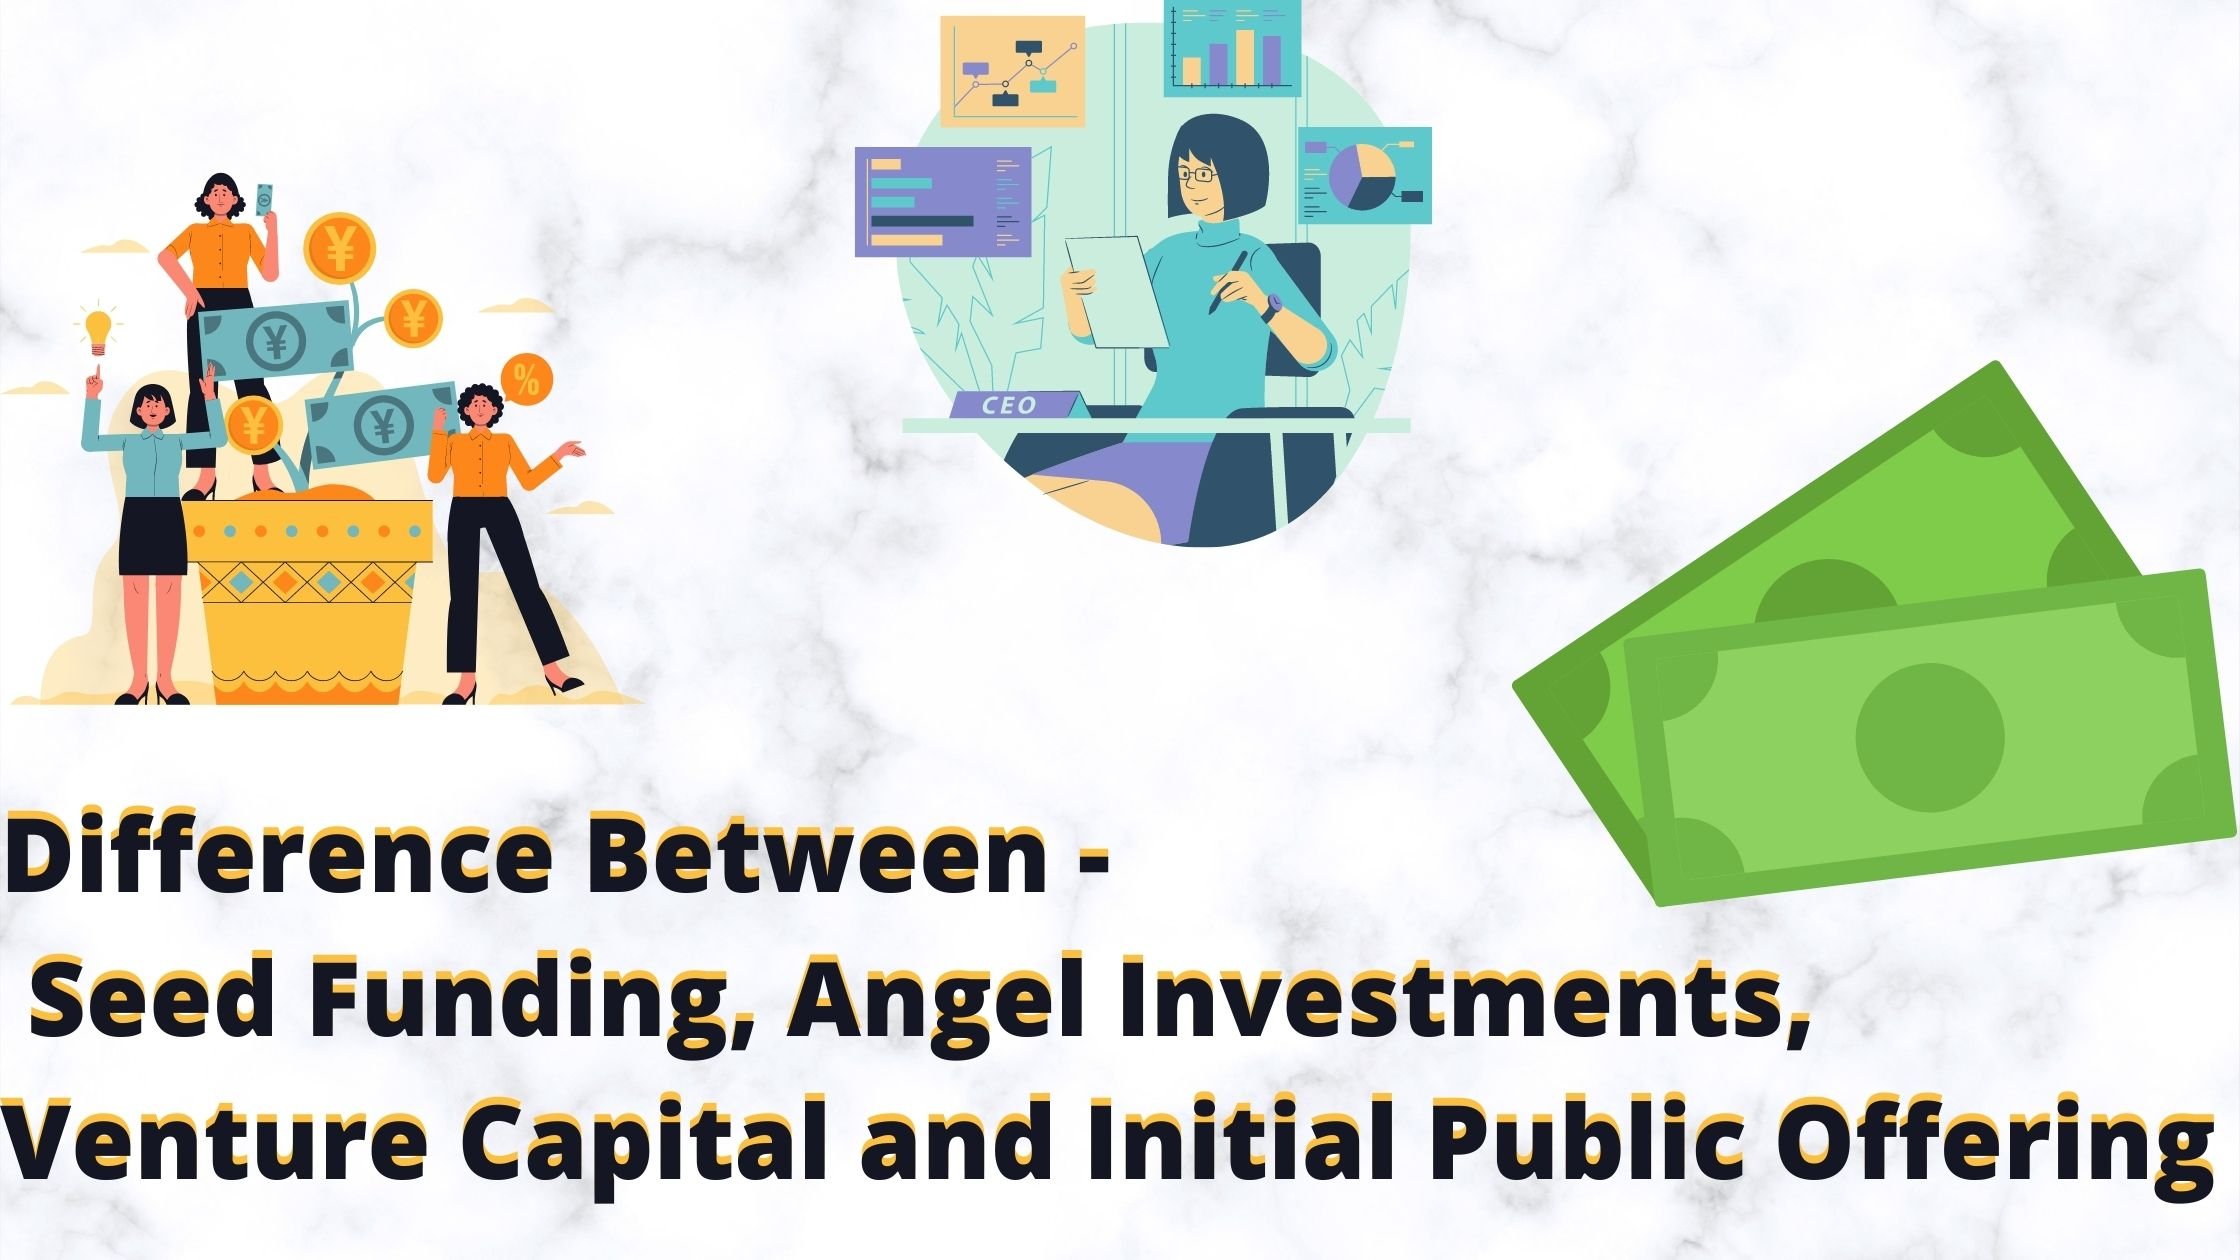 Difference between Seed Funding, Angel Investments, Venture Capital and Initial Public Offering